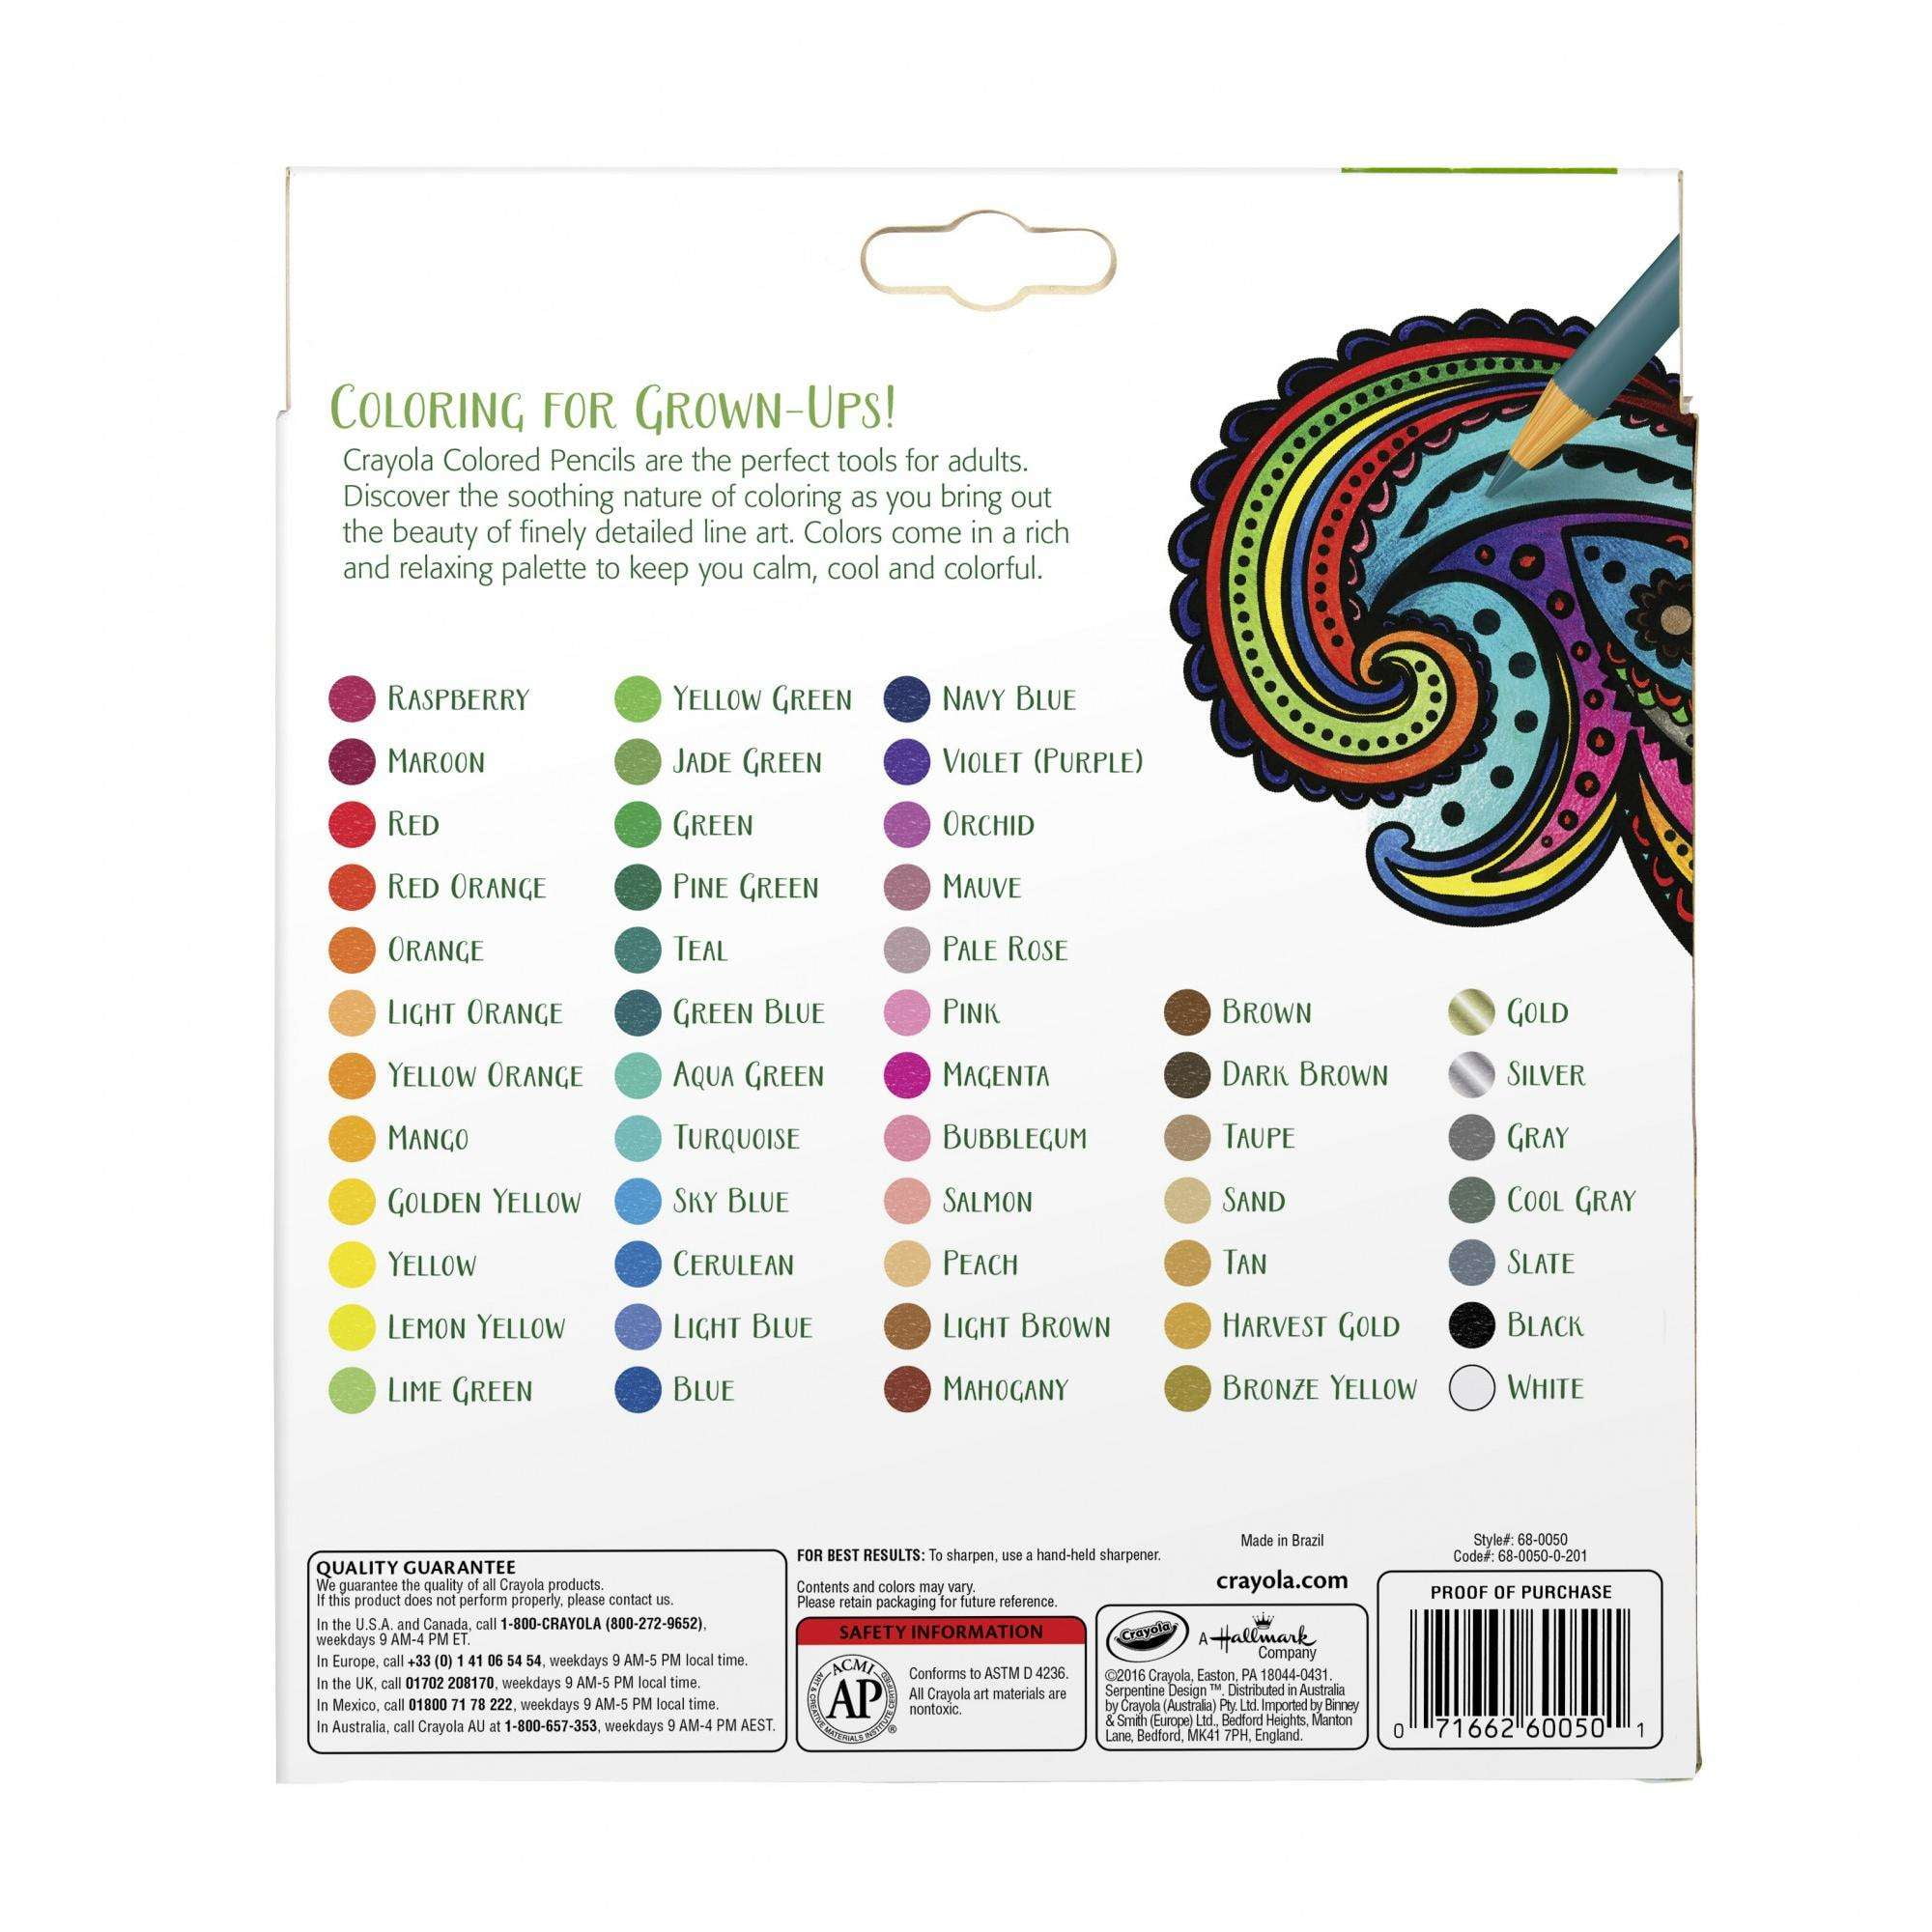 Crayola Colored Pencils 50-Count Pre-Sharpened, Assorted Colors 